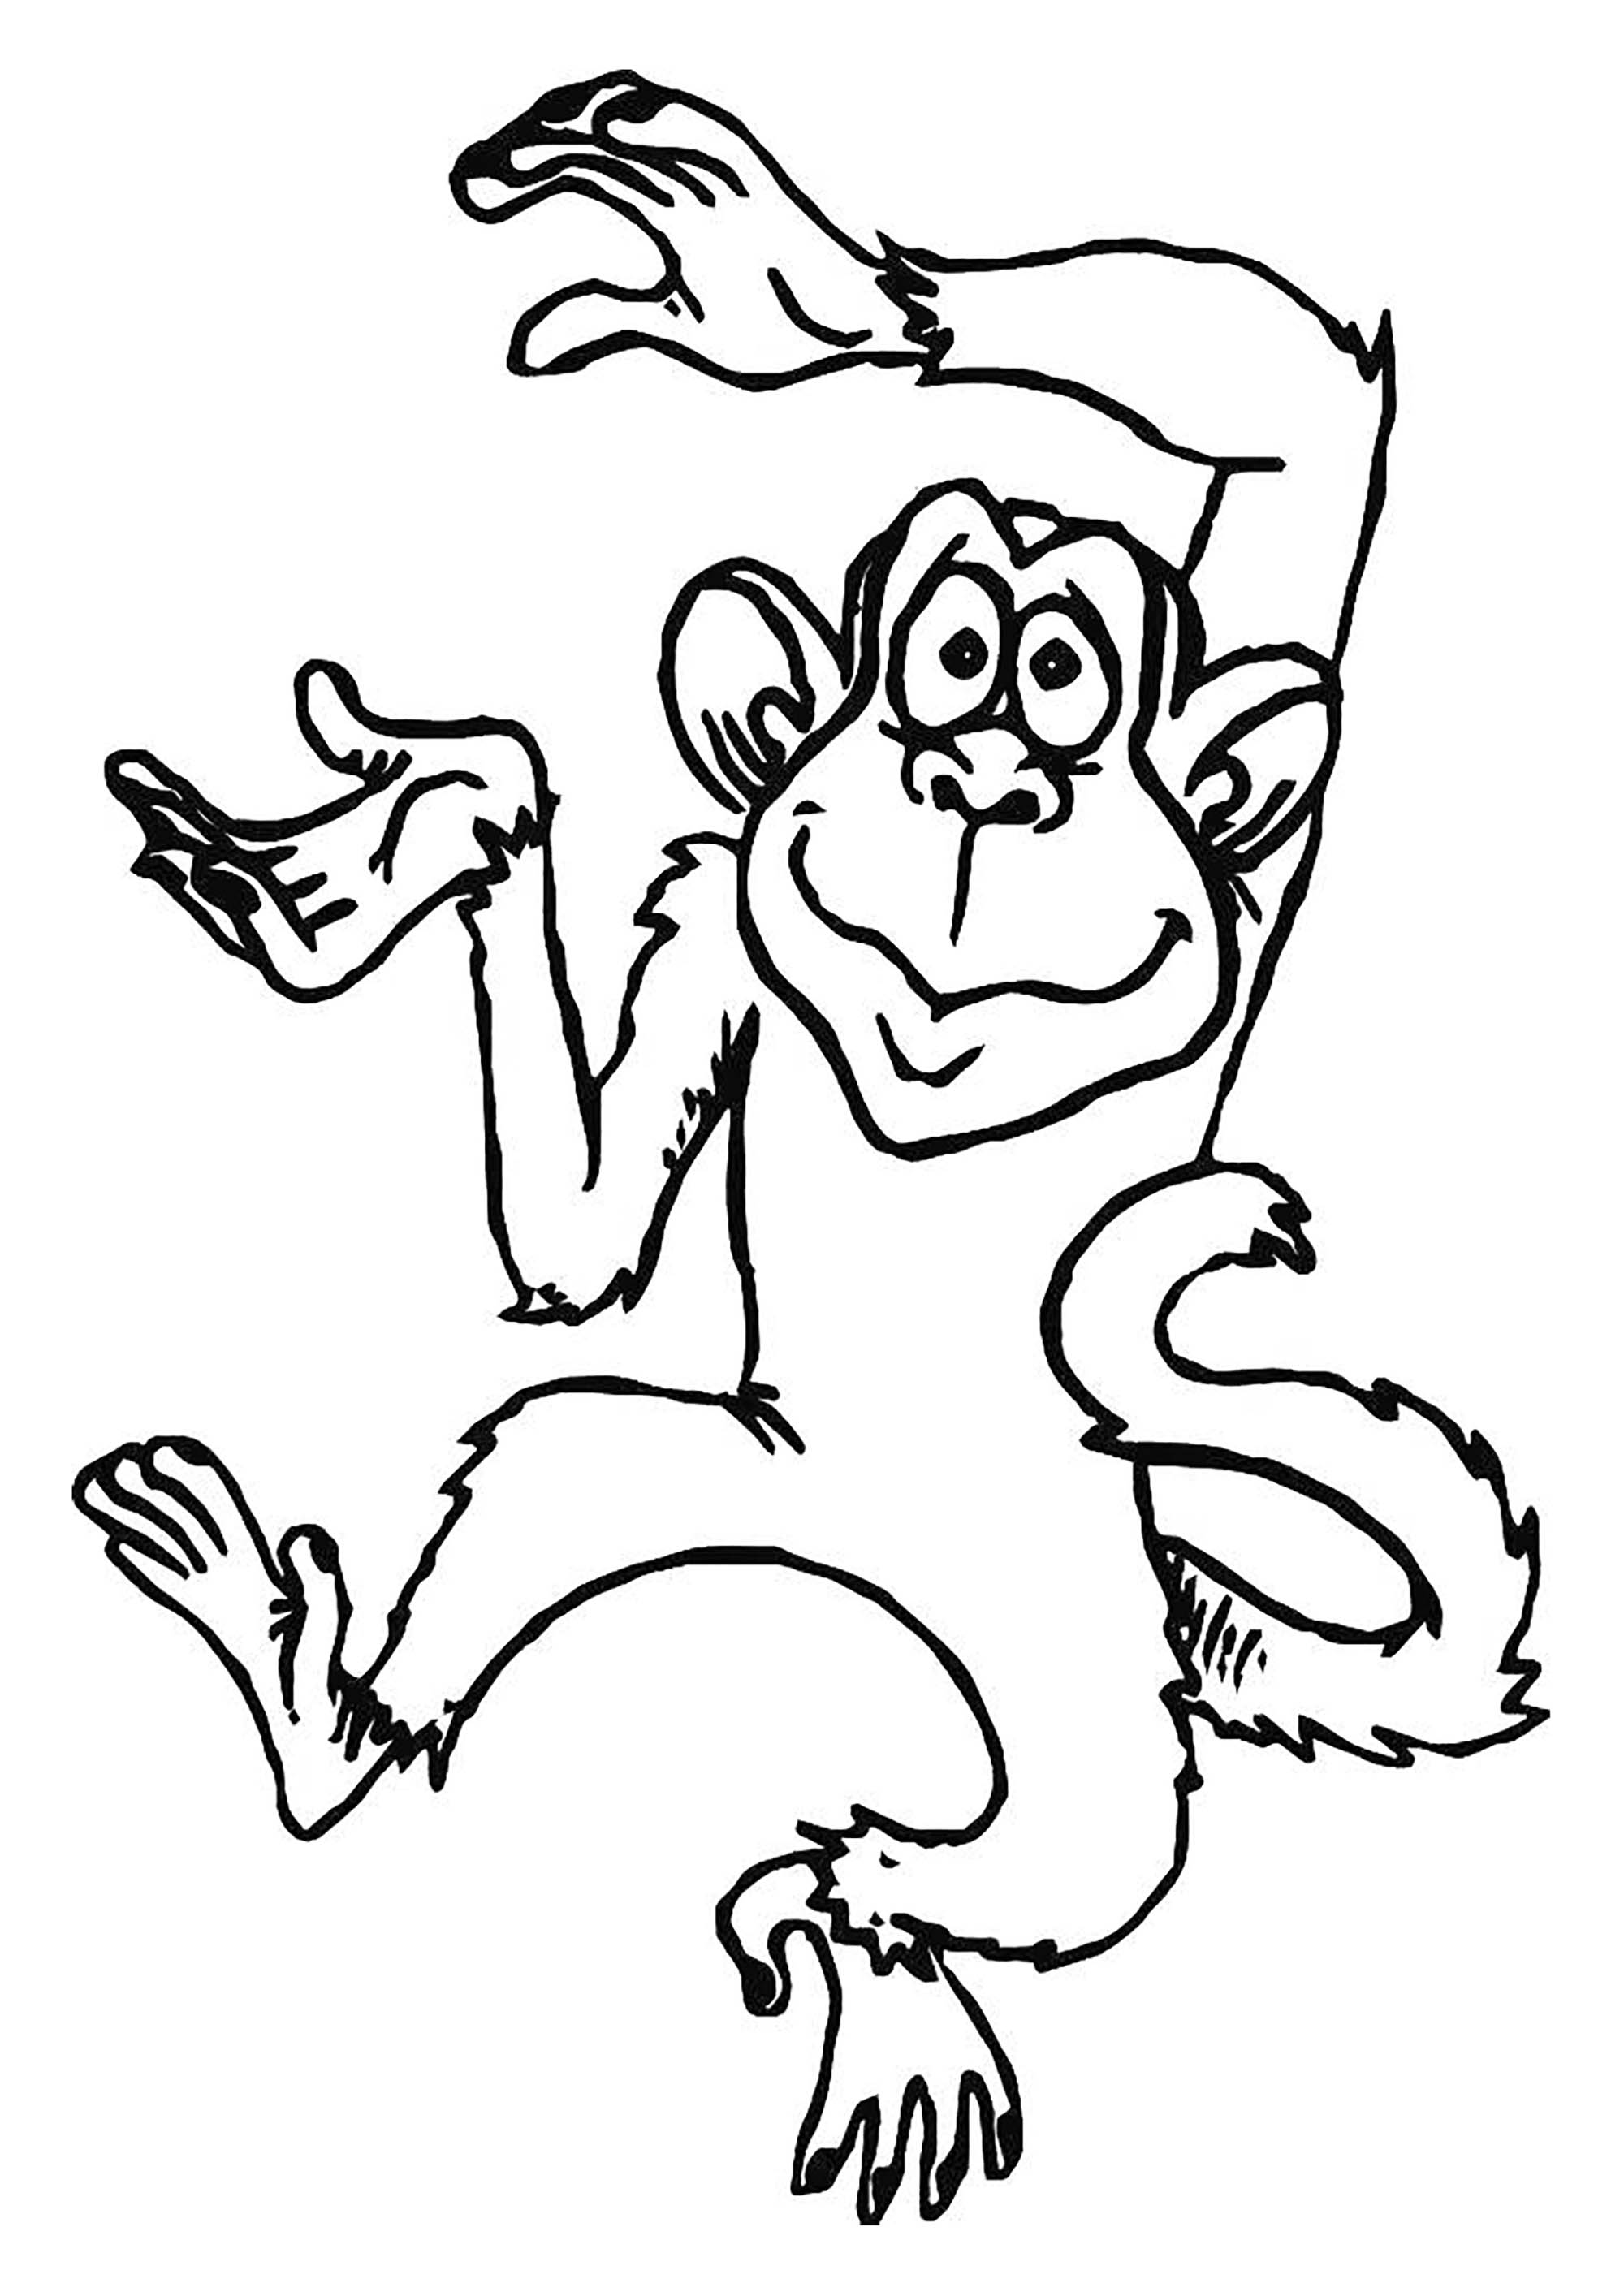 Download Monkeys to print for free - Monkeys Kids Coloring Pages